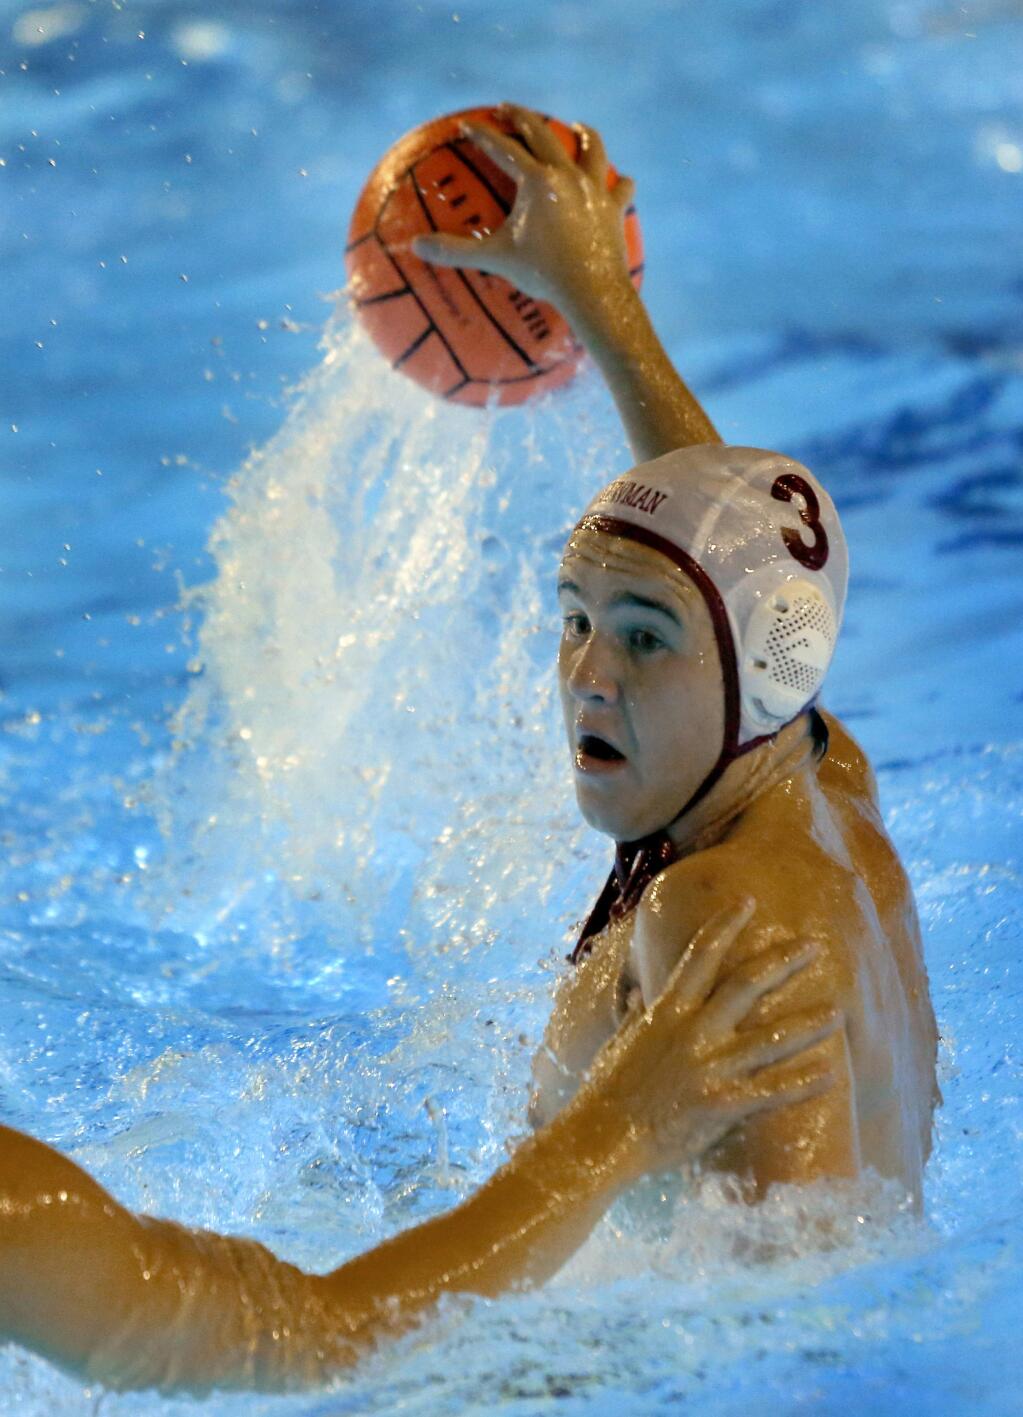 Cardinal Newman senior Jack Stafford, 17, looks to score during water polo practice at Santa Rosa Jr. College in Santa Rosa, on Wednesday, October 14, 2015. (BETH SCHLANKER/ The Press Democrat)